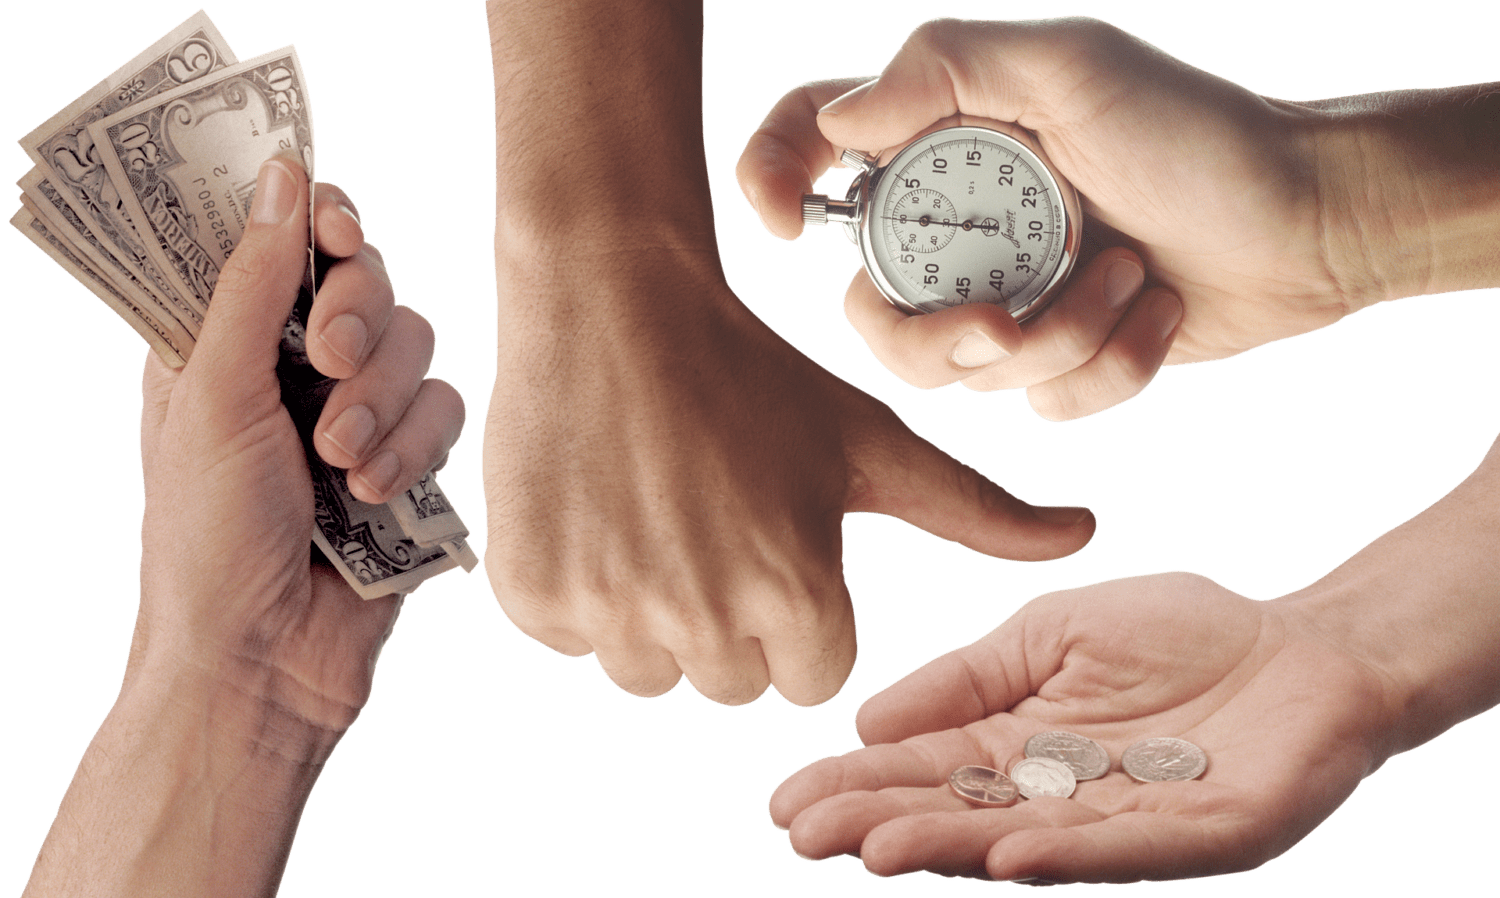 A hand doing a thumbs up, a hand holding coins and another hand holding a stopwatch